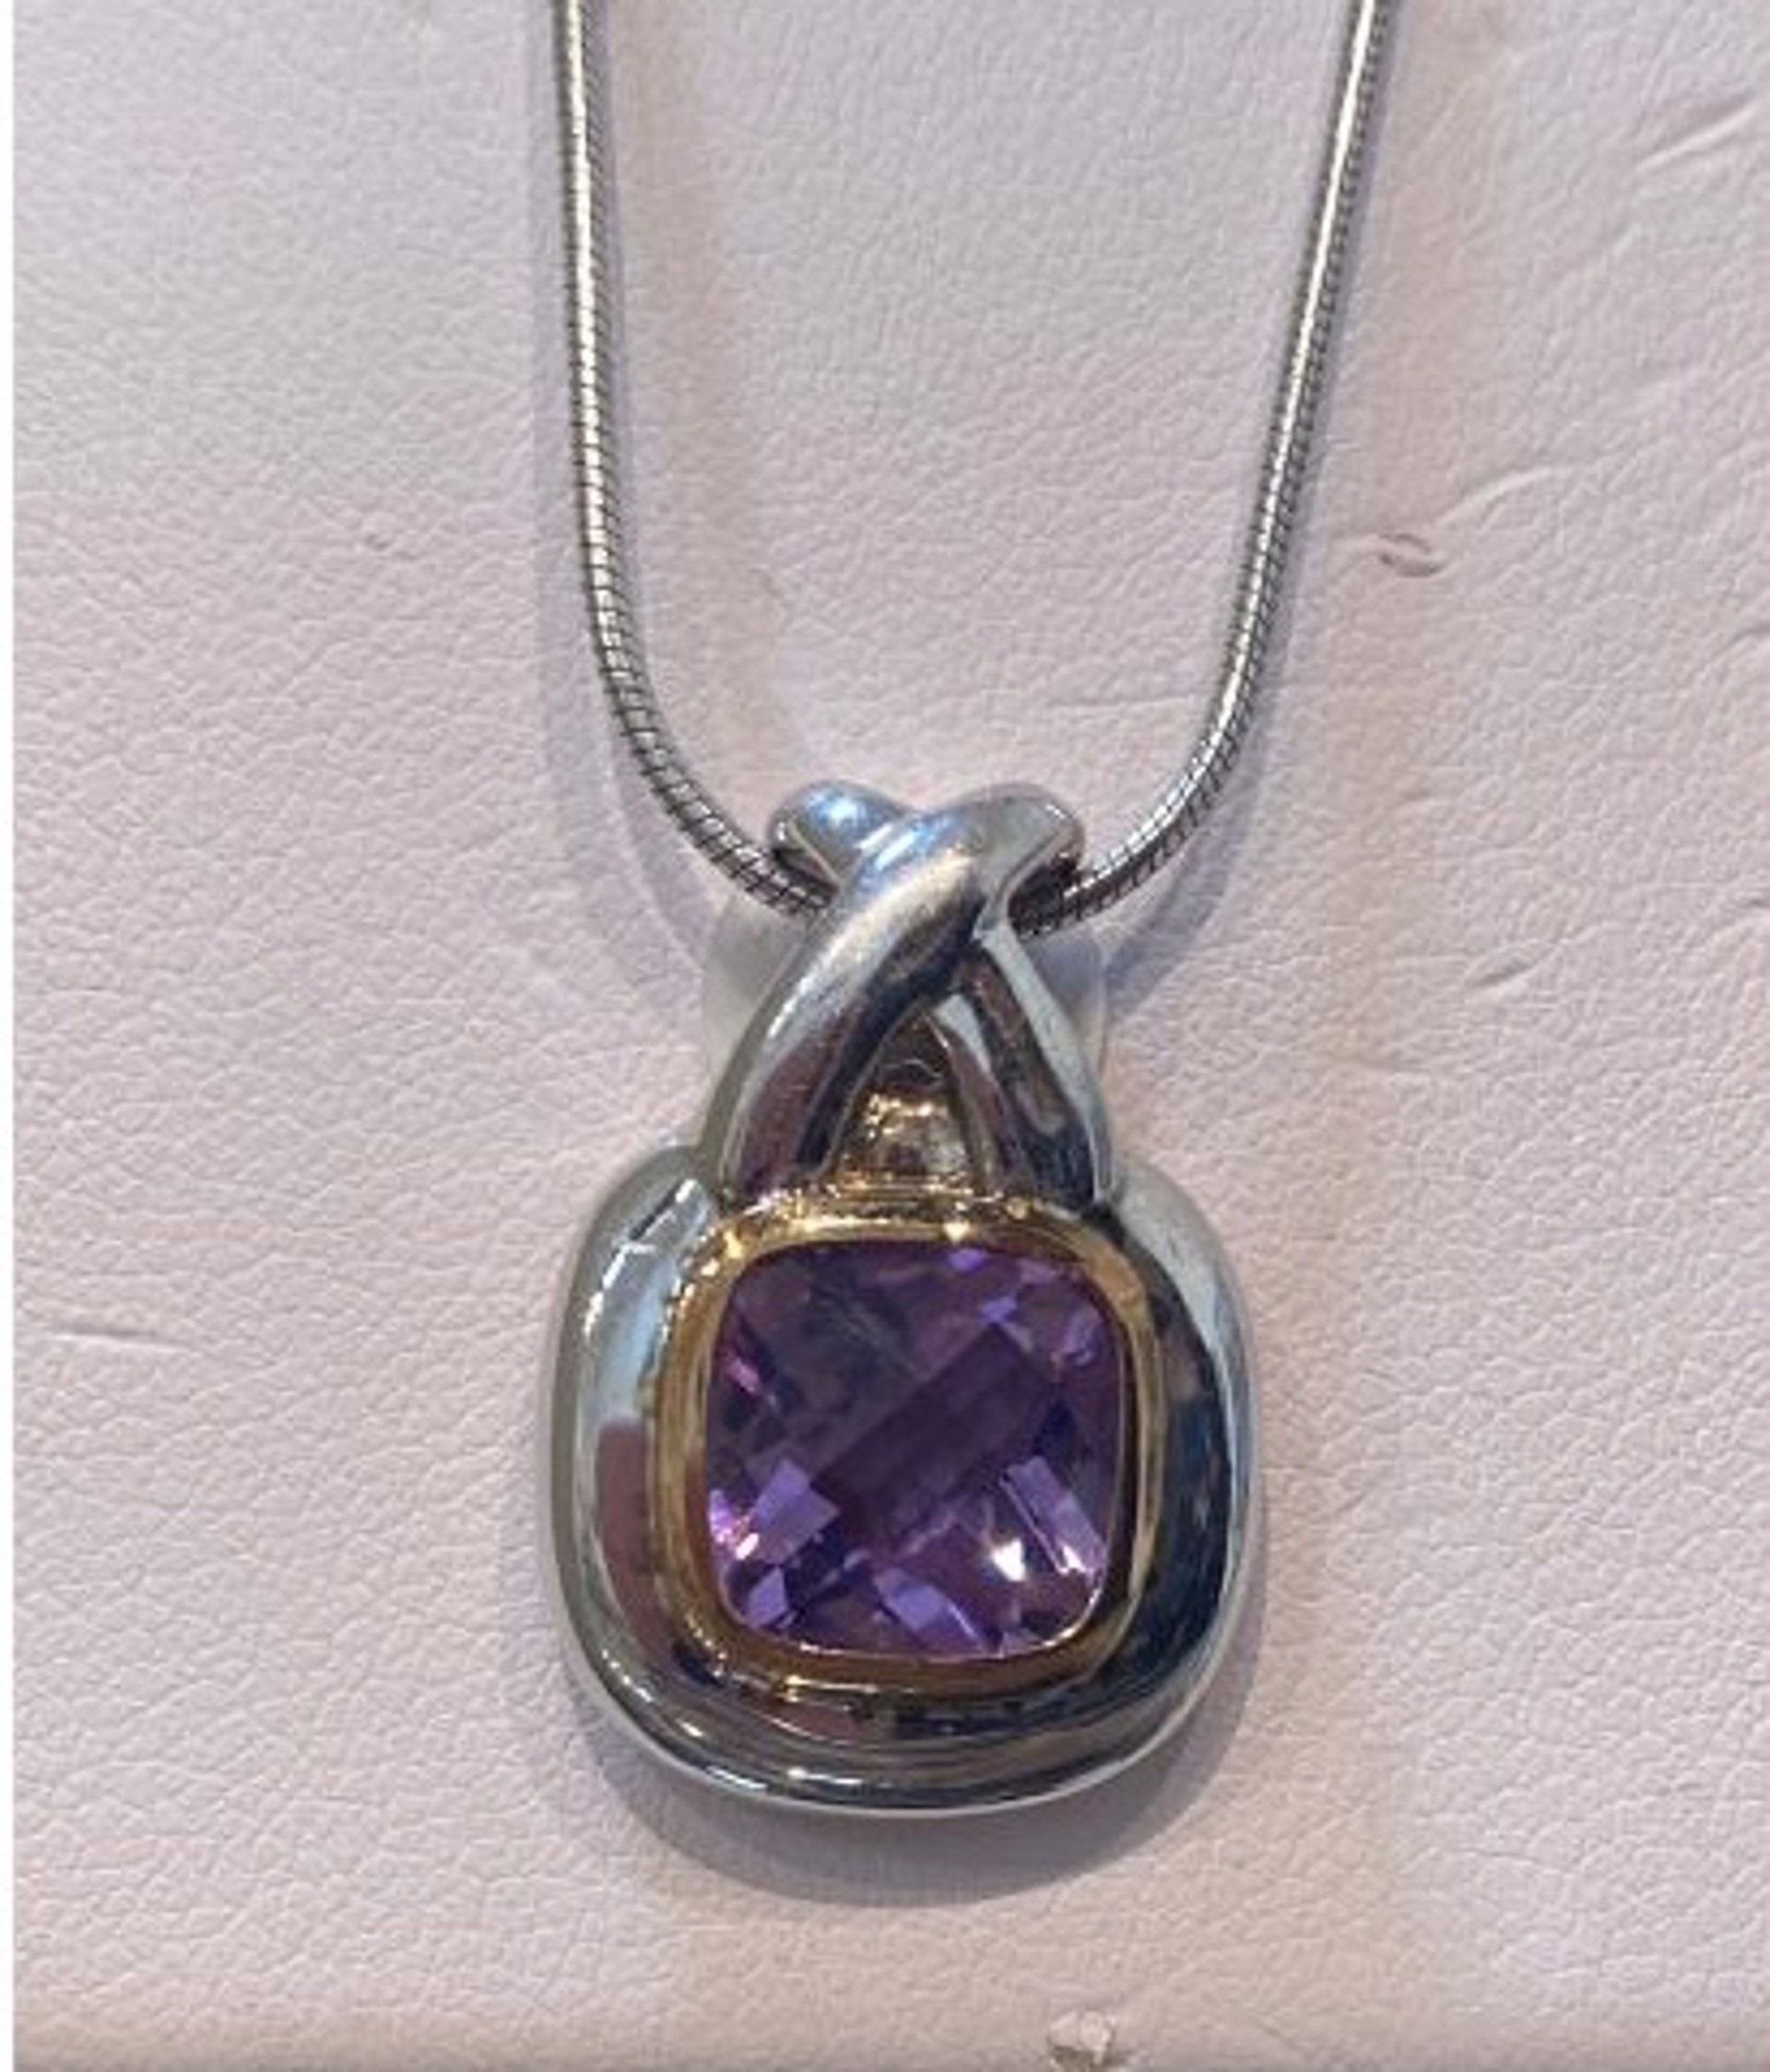 Pendant - XO Amethyst Sterling Silver with 14KT Gold Surround by Joryel Vera